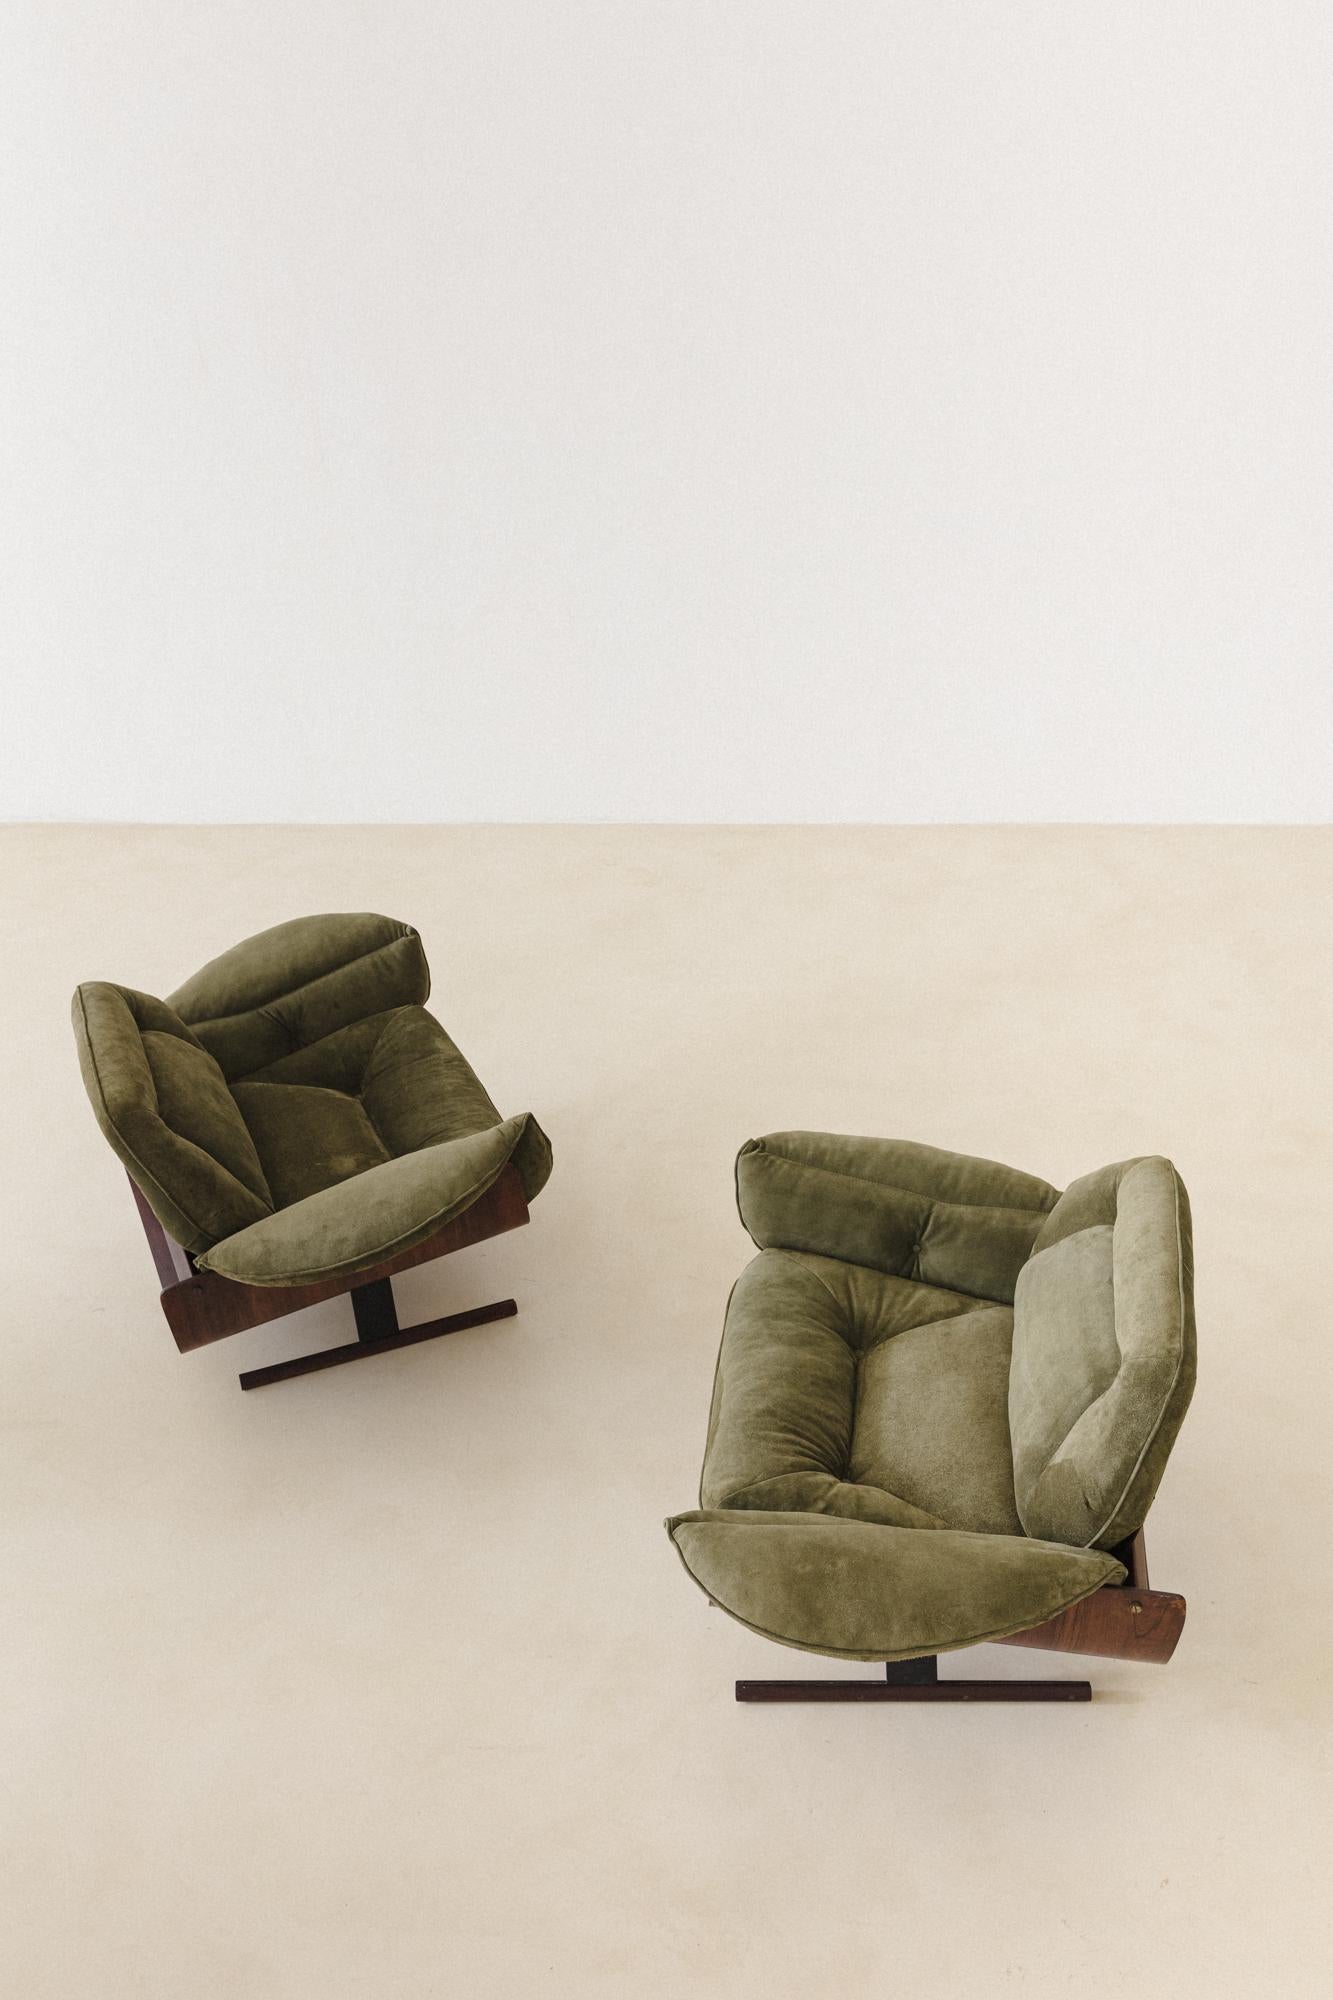 The iconic Presidencial is a series composed of a sofa and armchair designed by Jorge Zalszupin (1922-2020) in 1959 and produced by his company, L'atelier. The piece is made of molded laminate wood. Presidencial armchairs and sofa take advantage of